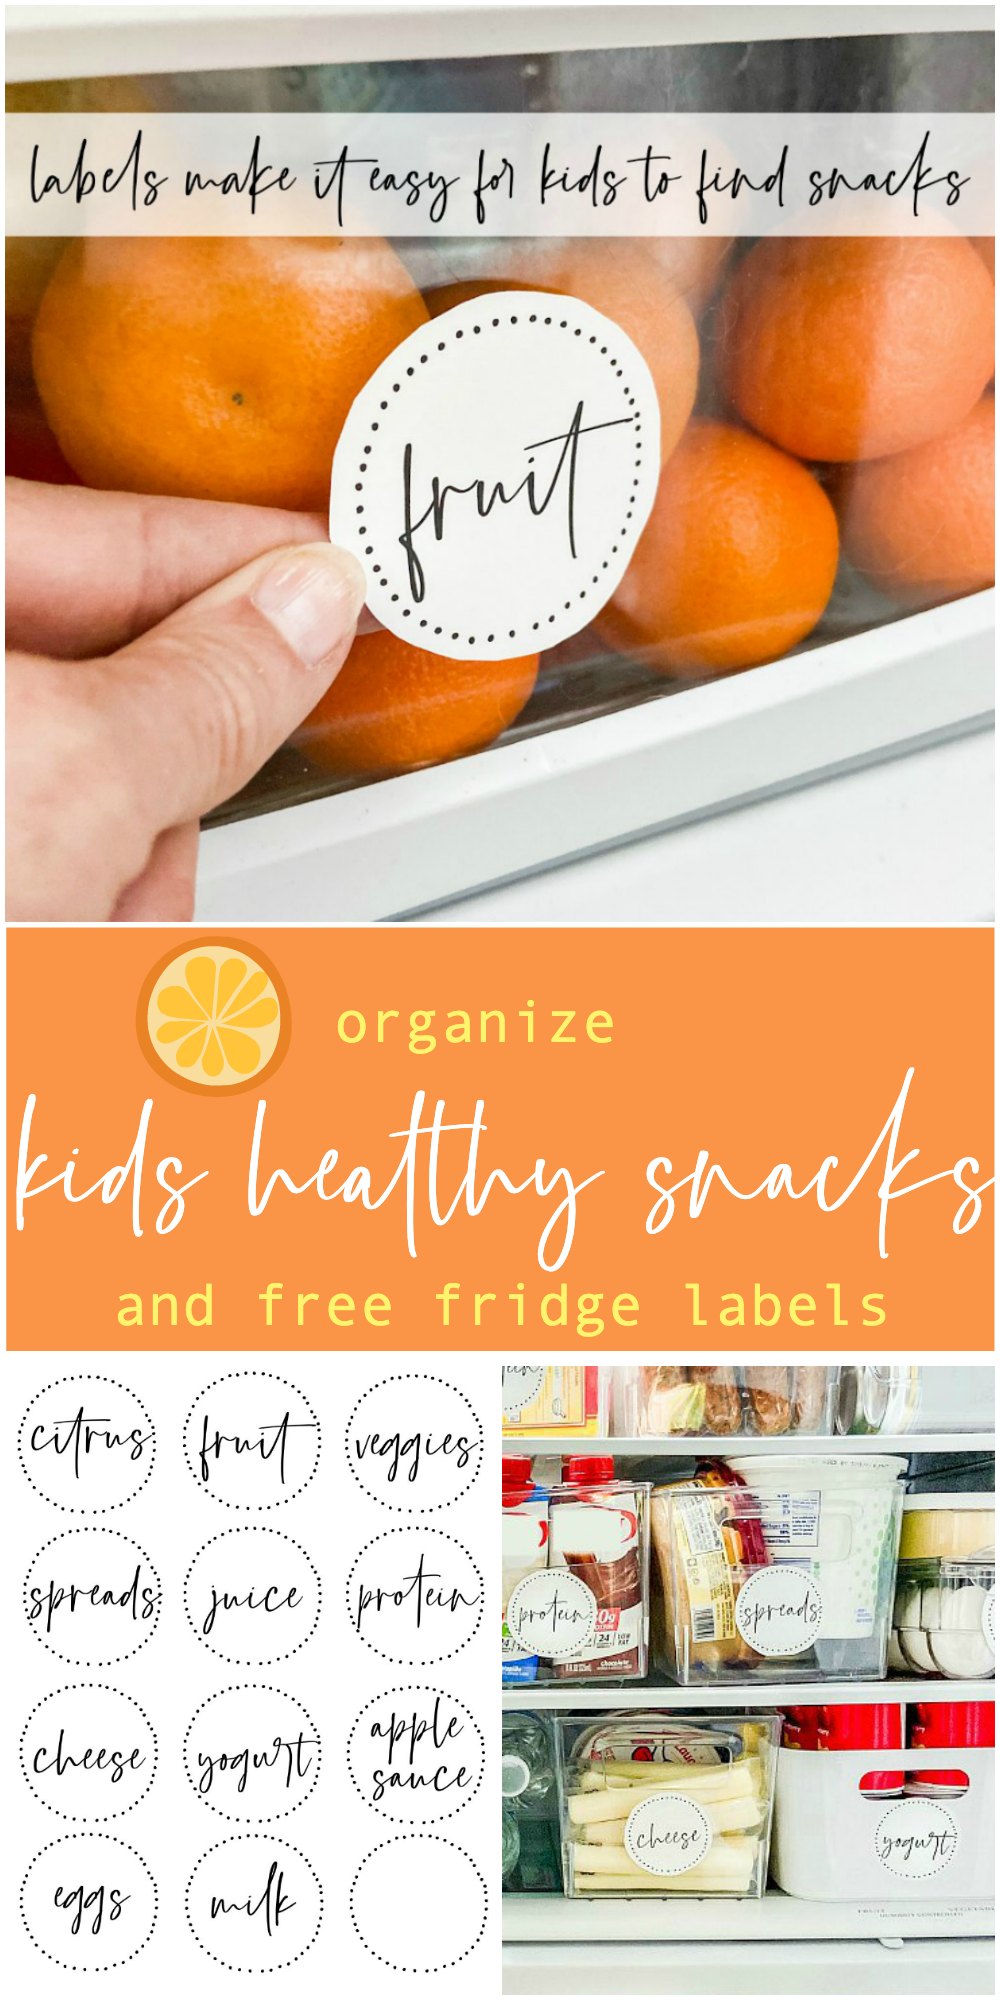 Organiz healthy snacks and lunch items and free labels